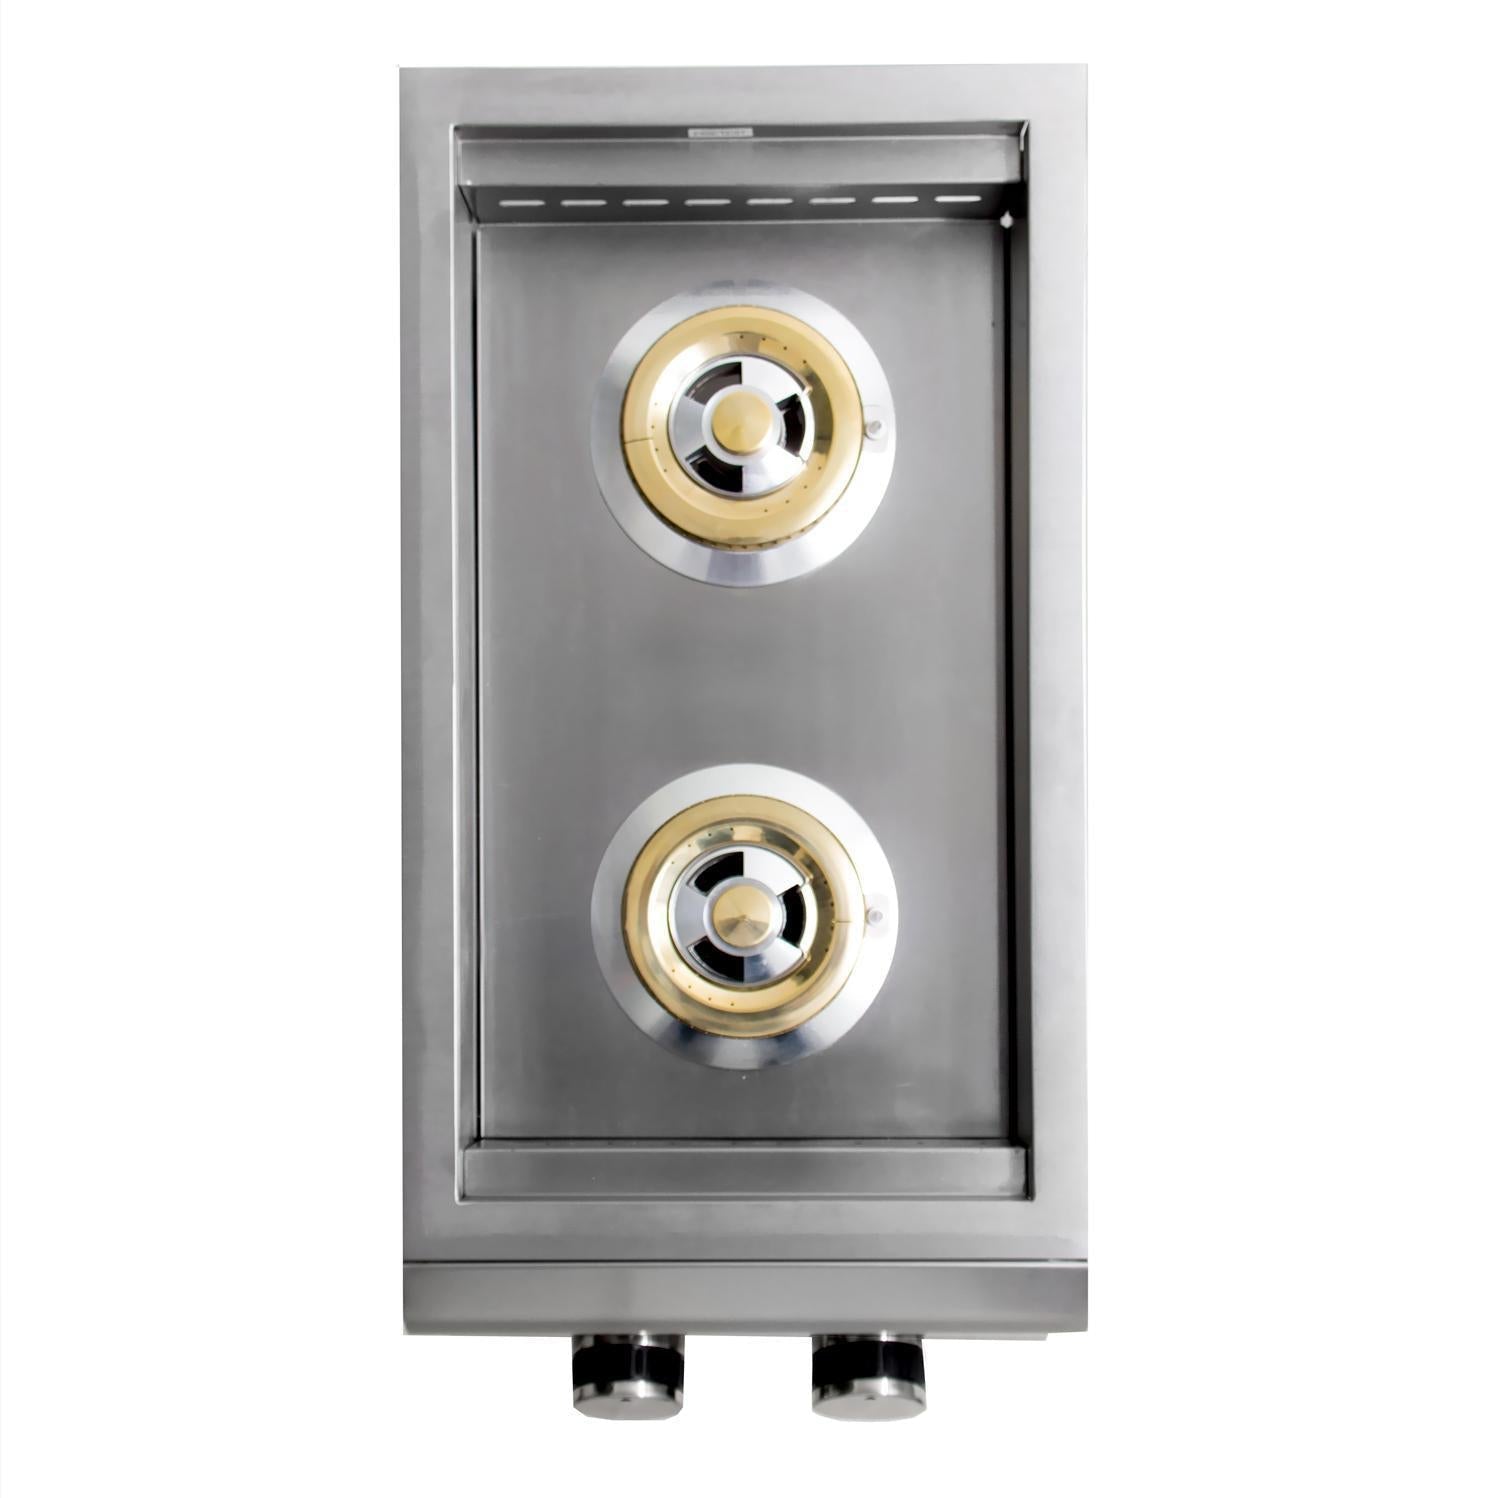 Blaze LTE Built-In Propane Gas Stainless Steel Double Side Burner With Lid - BLZ-SB2LTE-LP